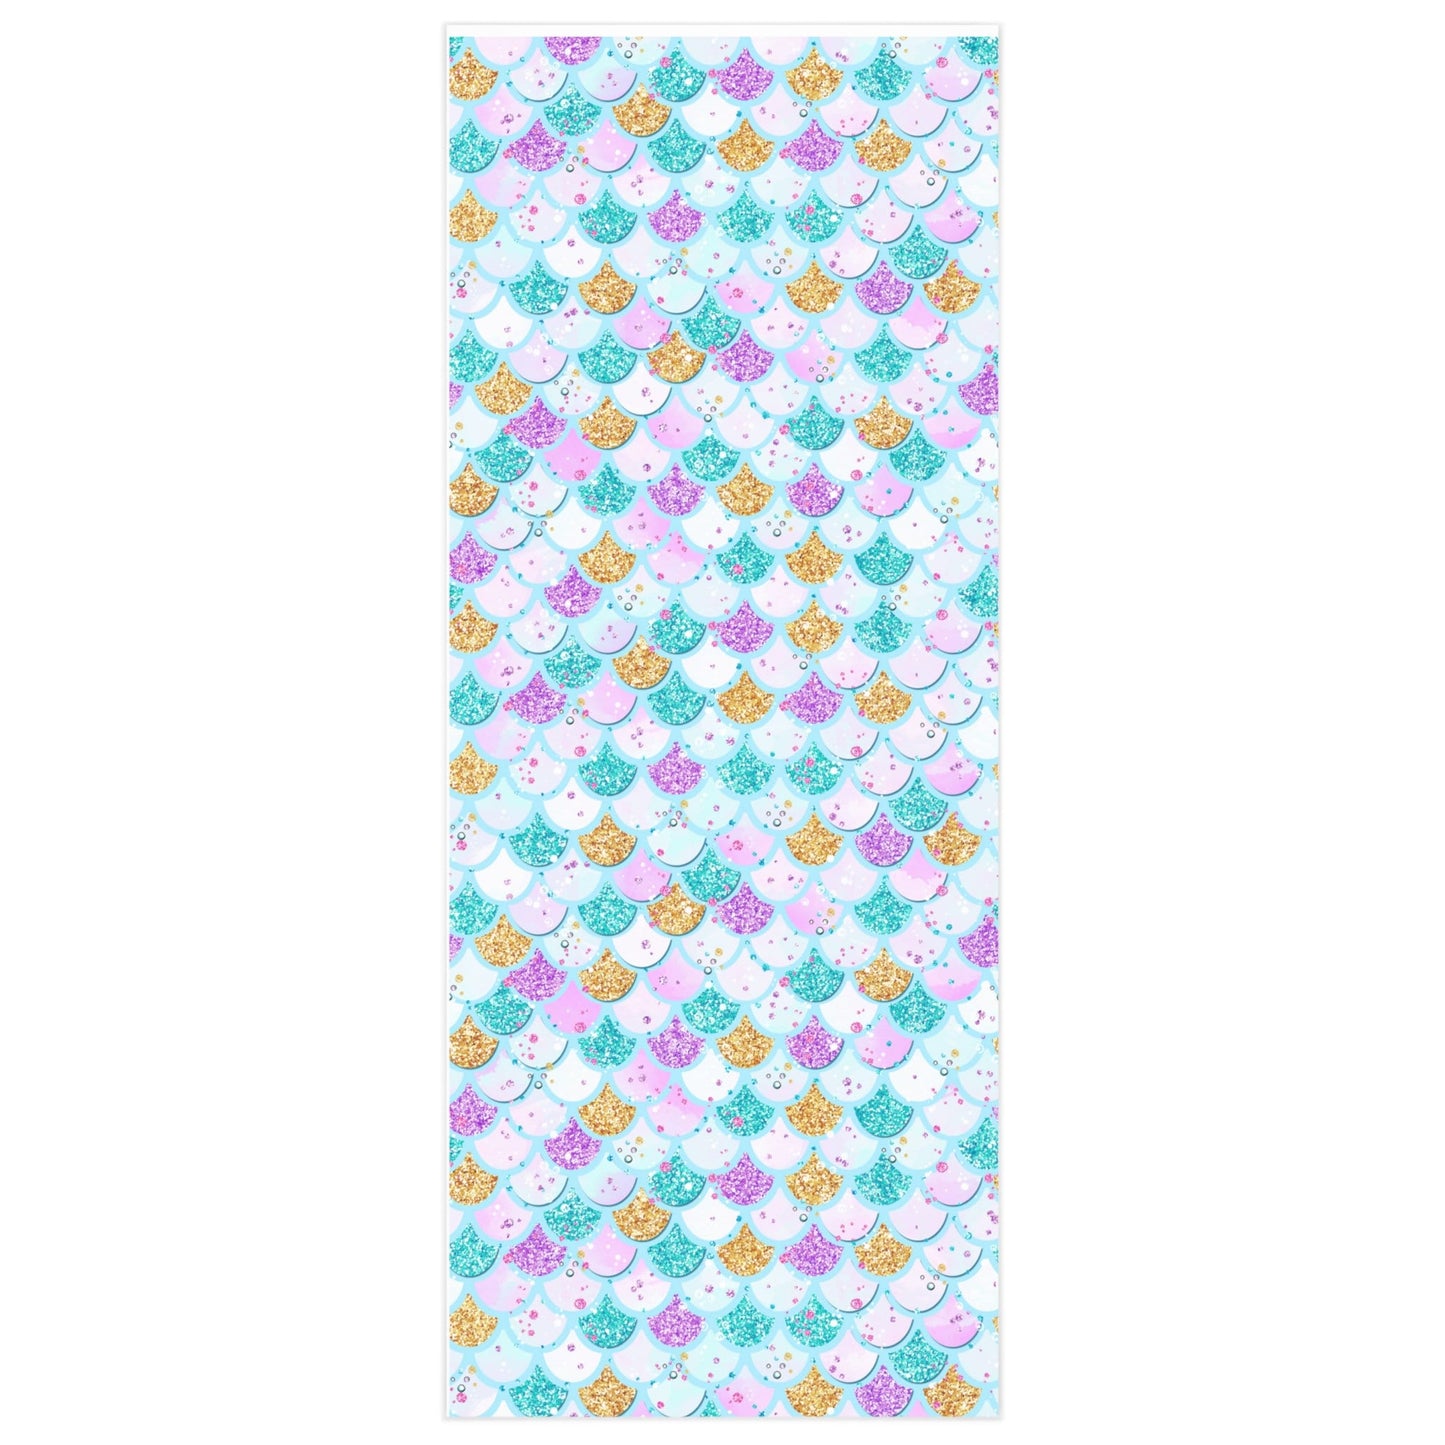 Mermaid Tail Birthday Gift Wrapping Paper, Pastel Blue Scales Pattern Paper, Baby Shower Wrap Paper, Mermaid Party Decor Christmas Gift Wrap